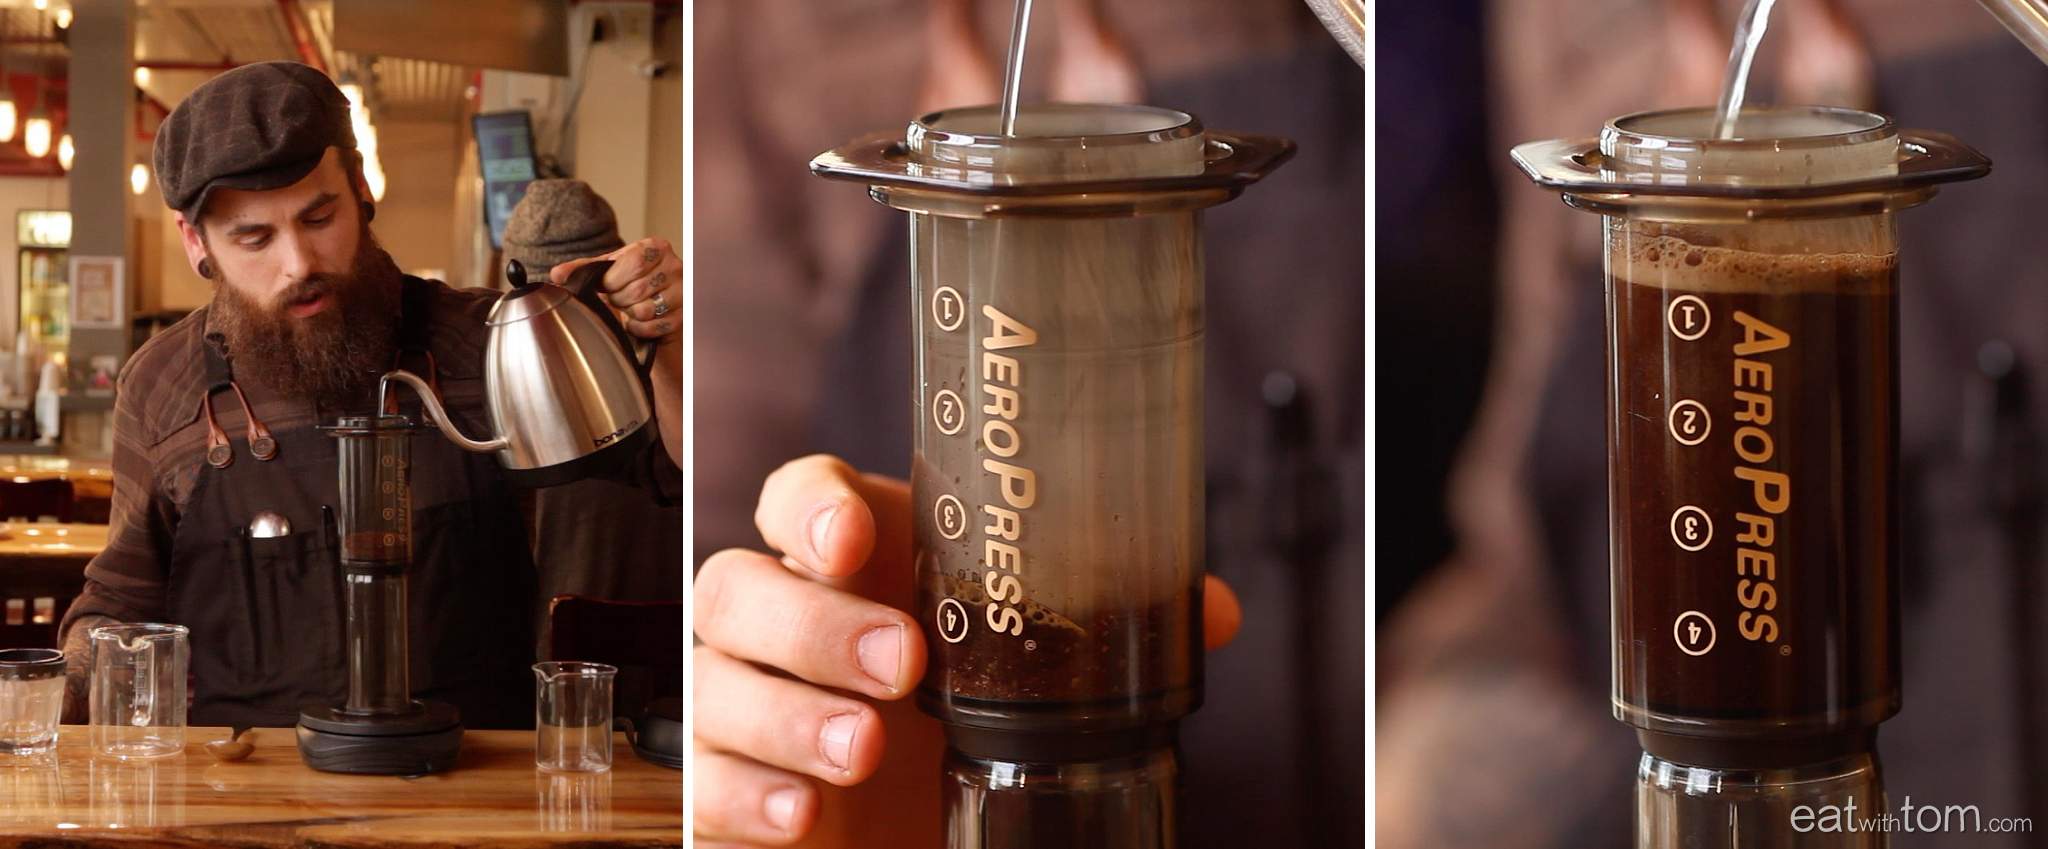 artisian coffee making tips video from everybodys coffee chicago brewing method